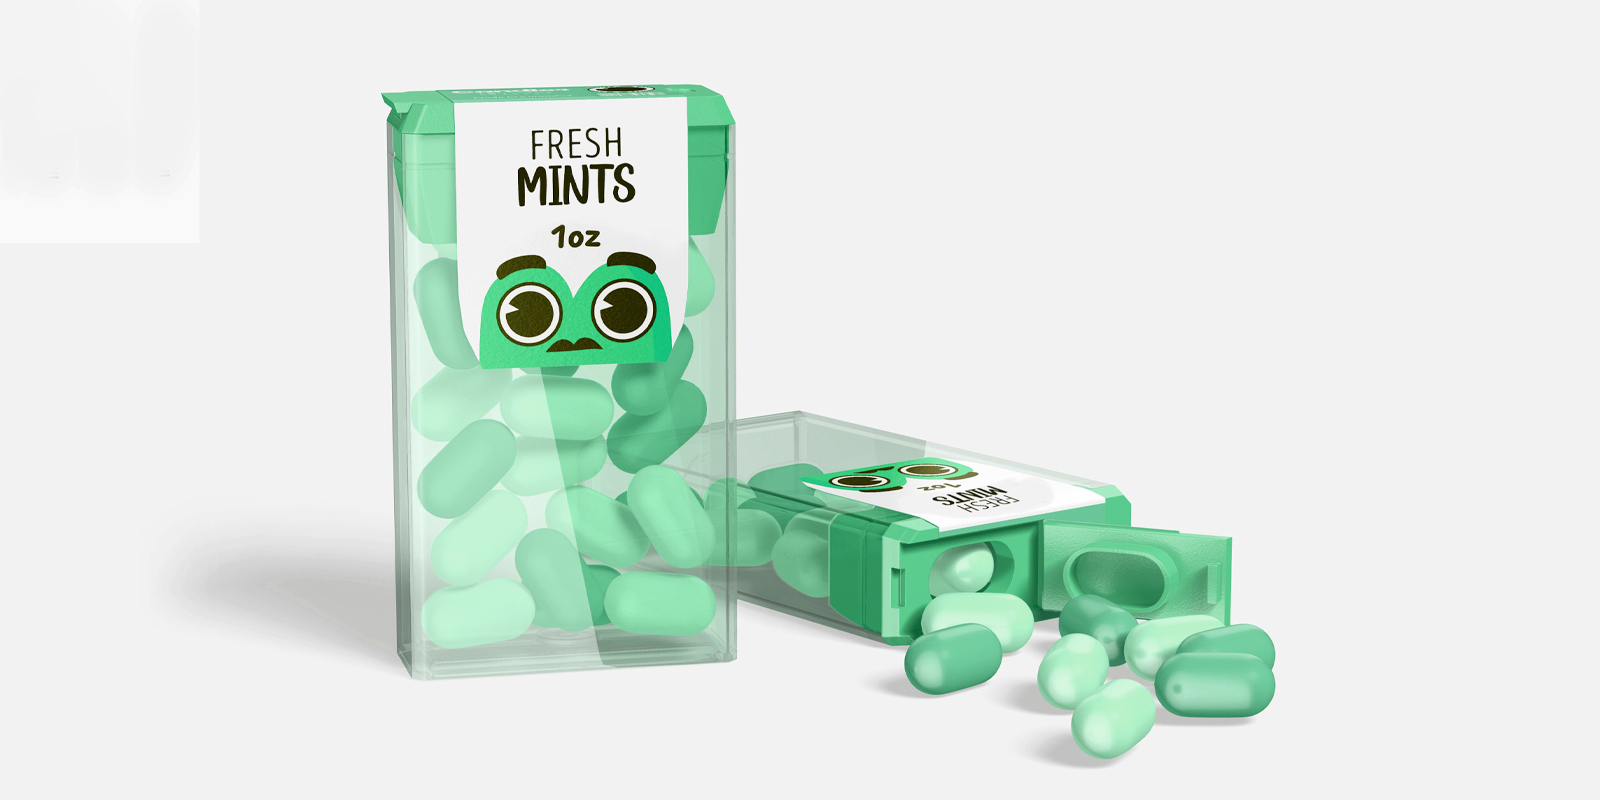 Mints in Madrid - Print with Pagerr